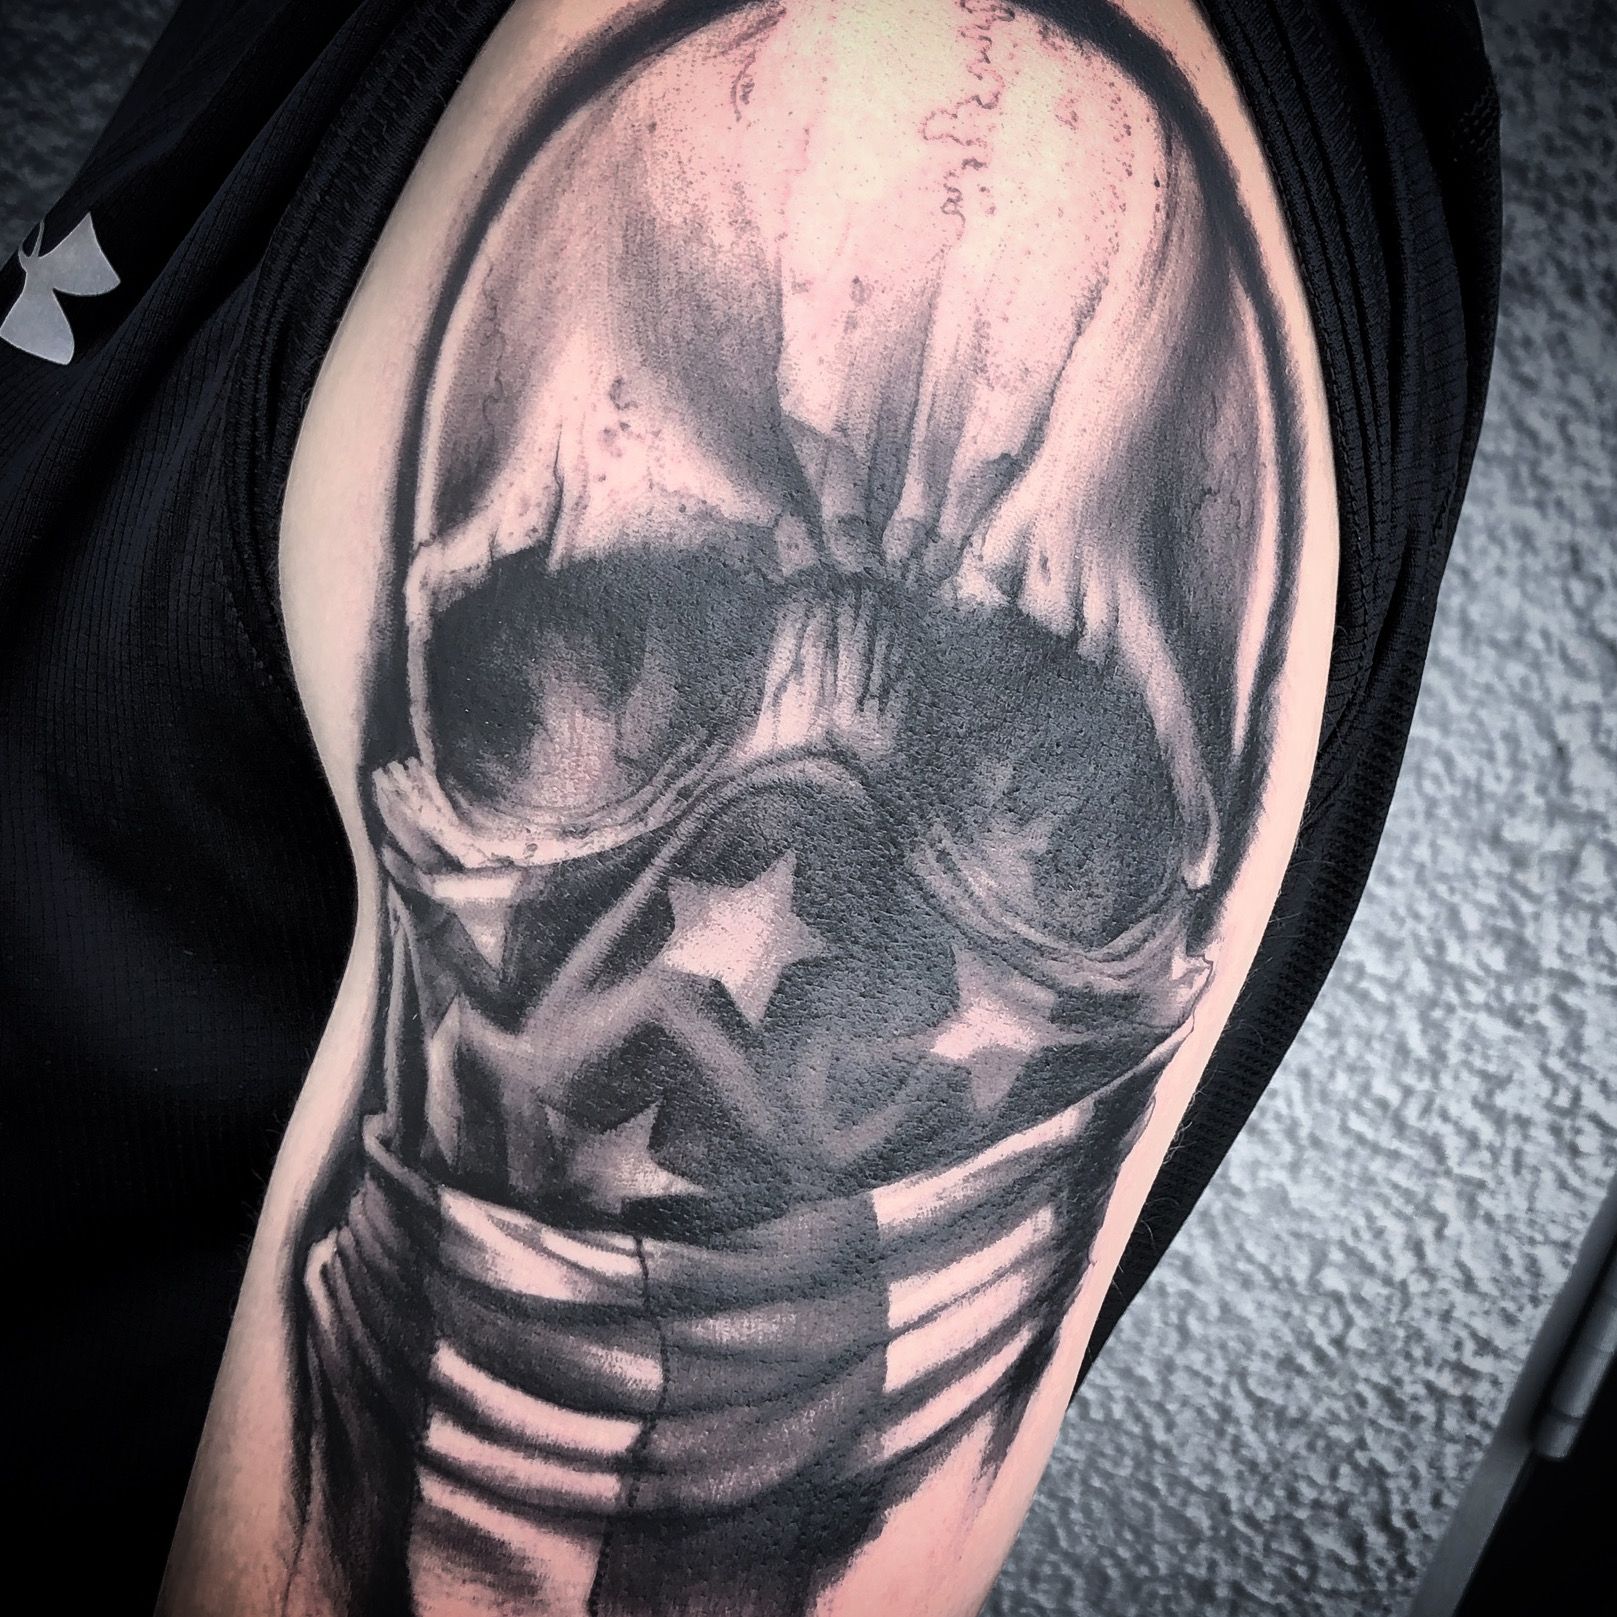 Alex Hunter Tattoos  Color realism skull painted with the American flag  on clients thigh  Facebook